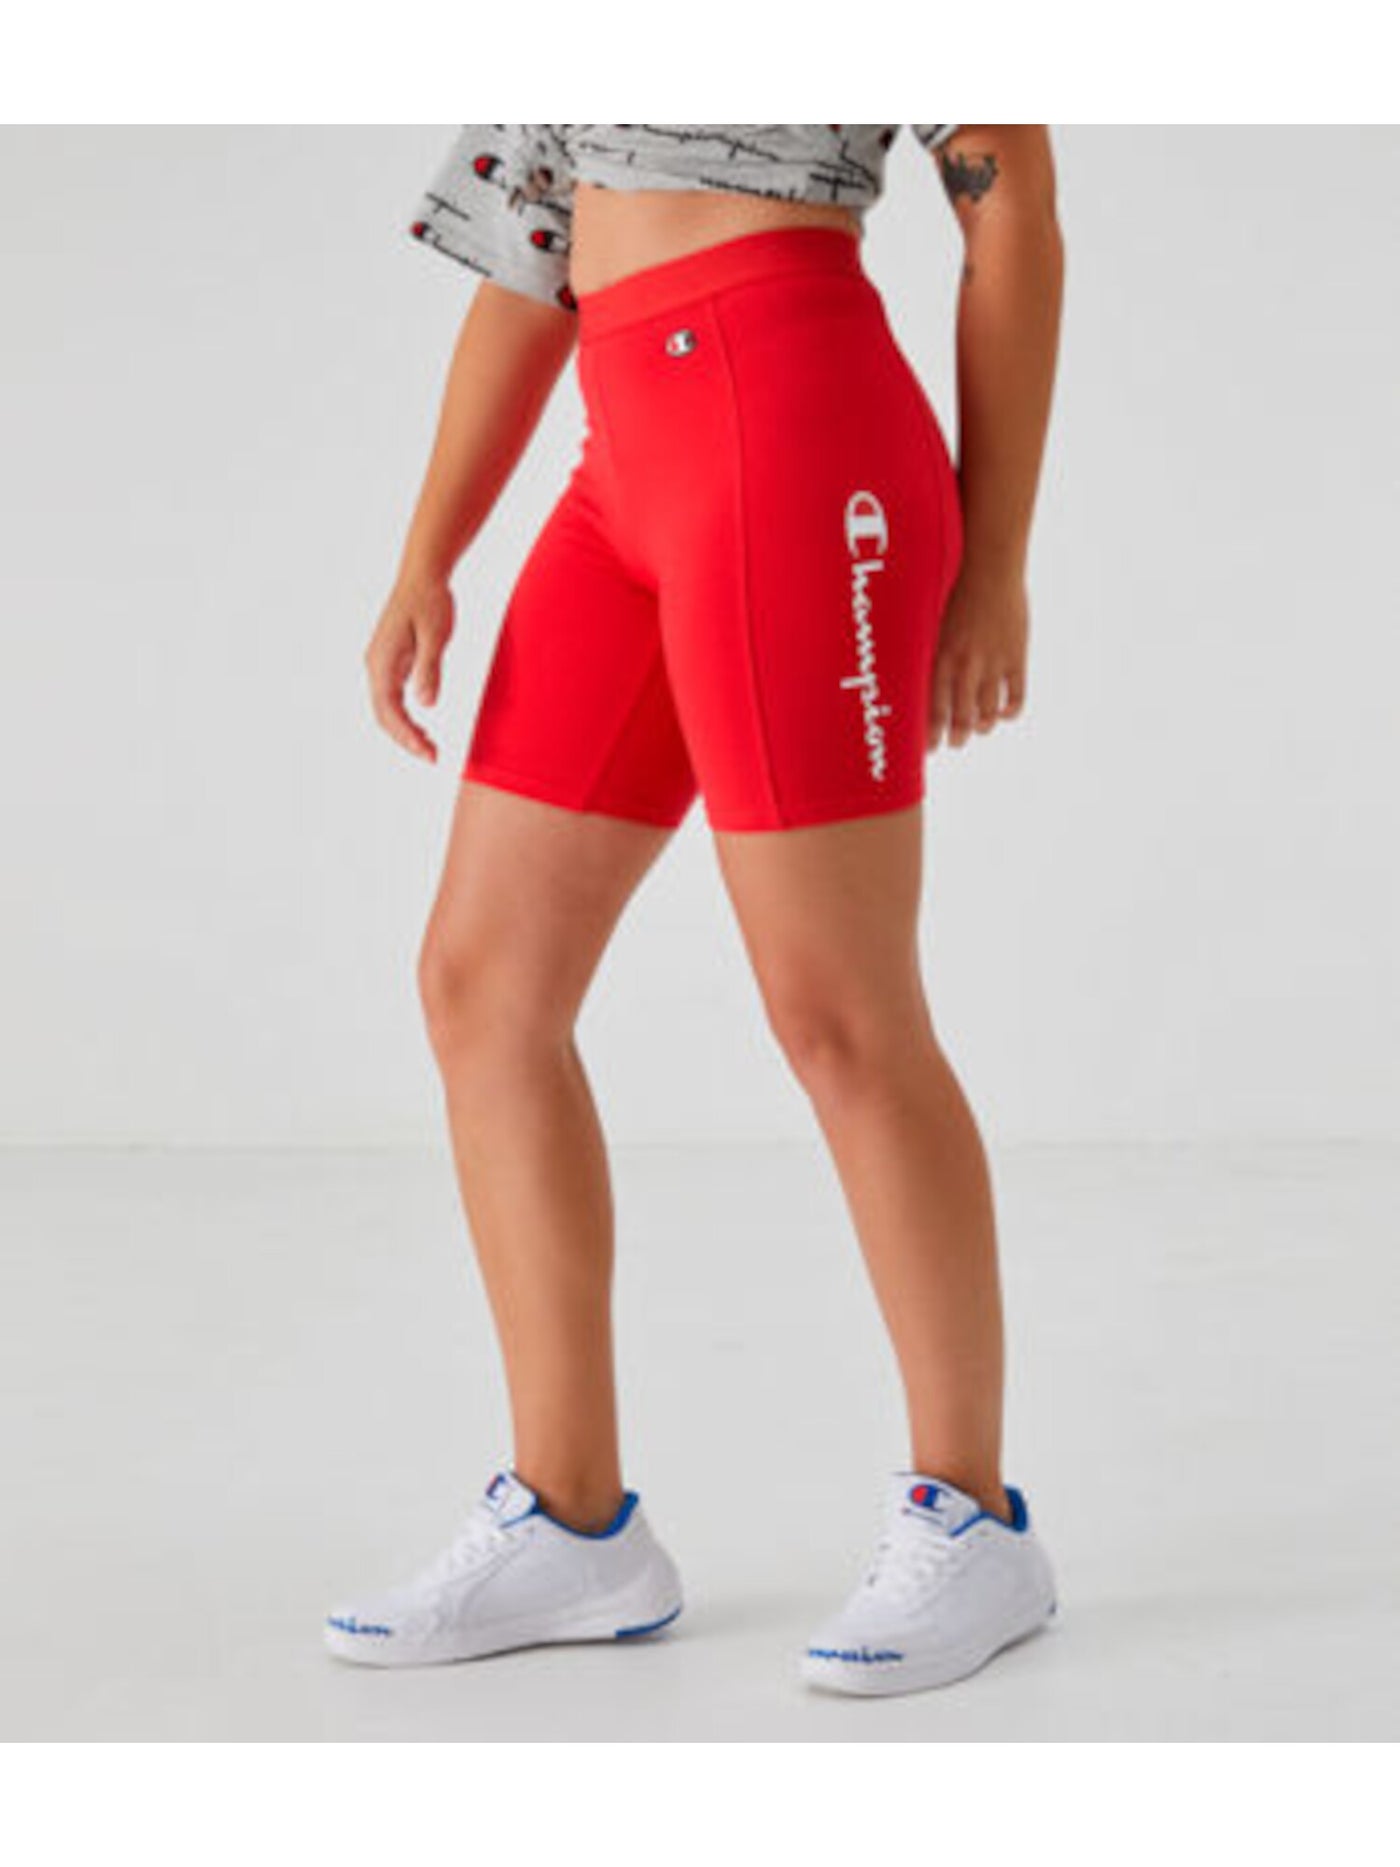 CHAMPION Womens Red Stretch Active Wear High Waist Shorts S